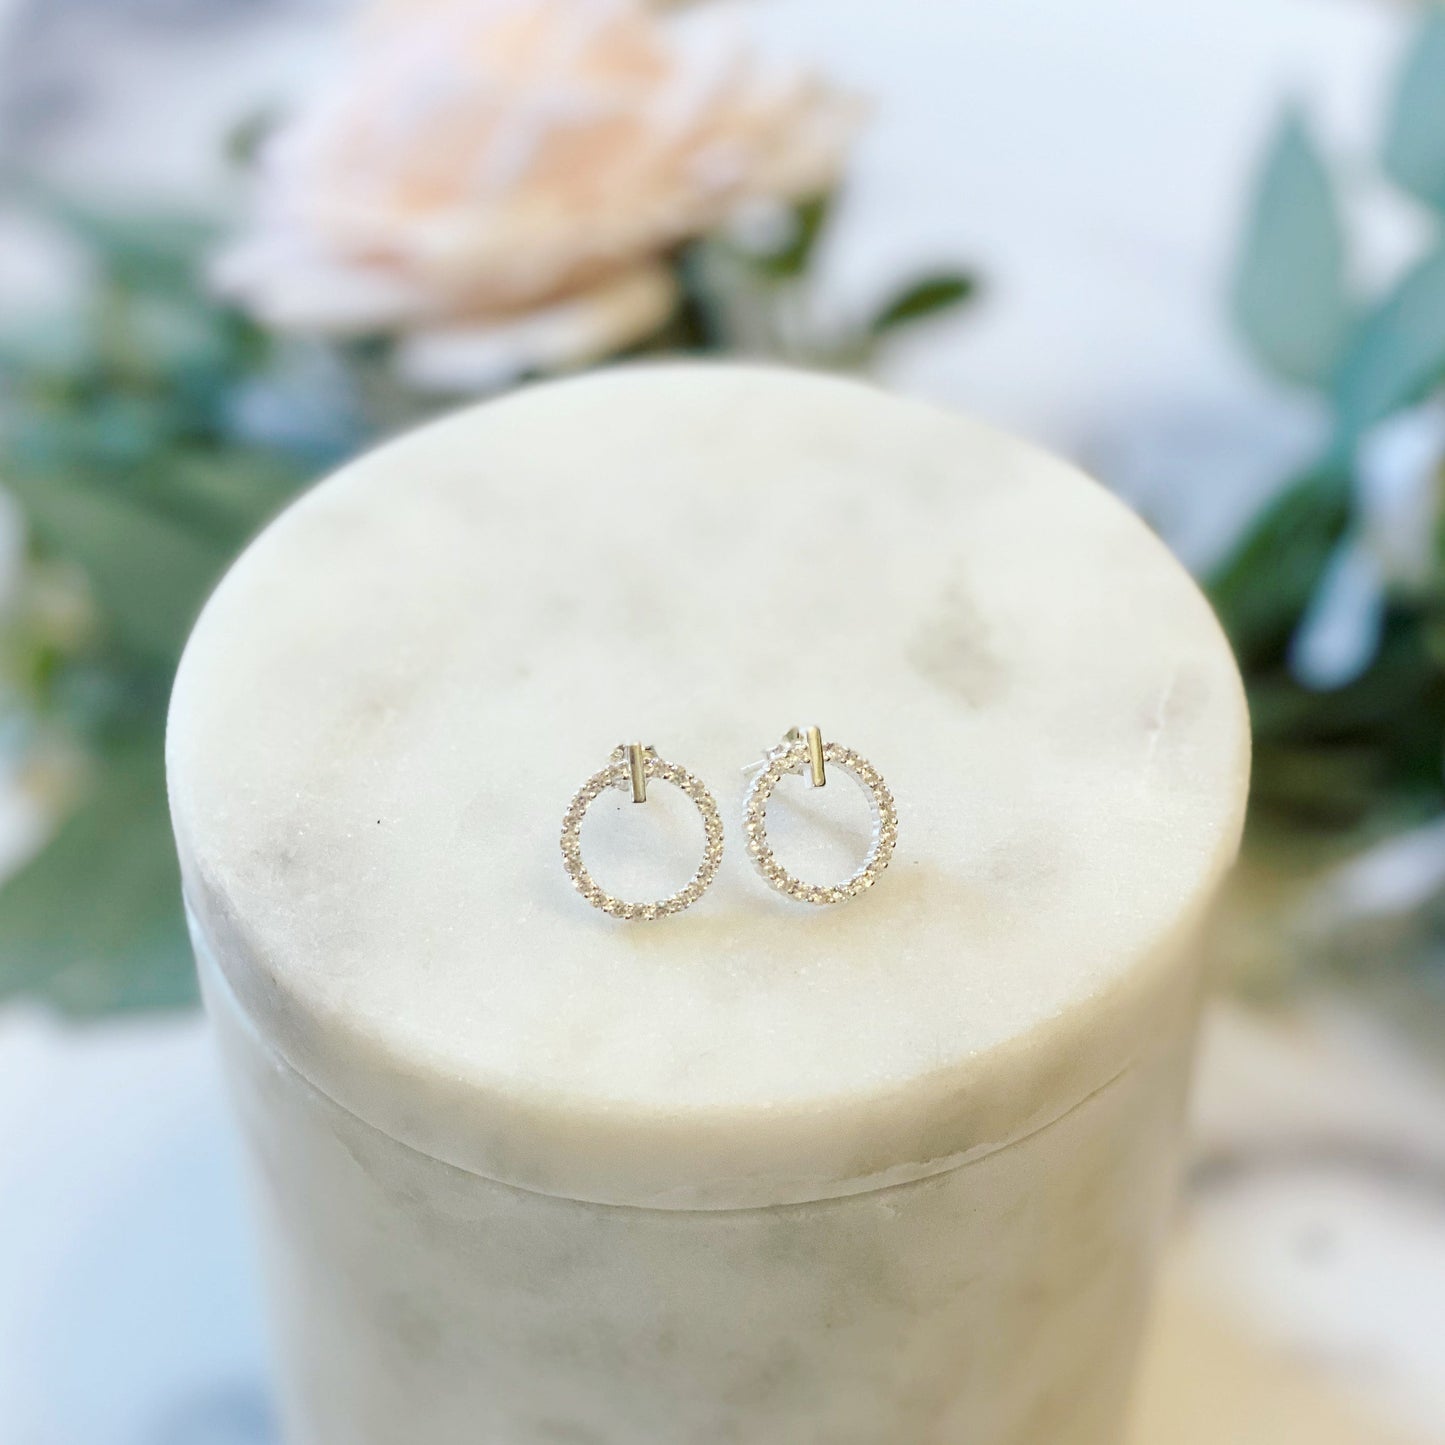 Bridesmaid Today, Friend for Life Circle Earrings!